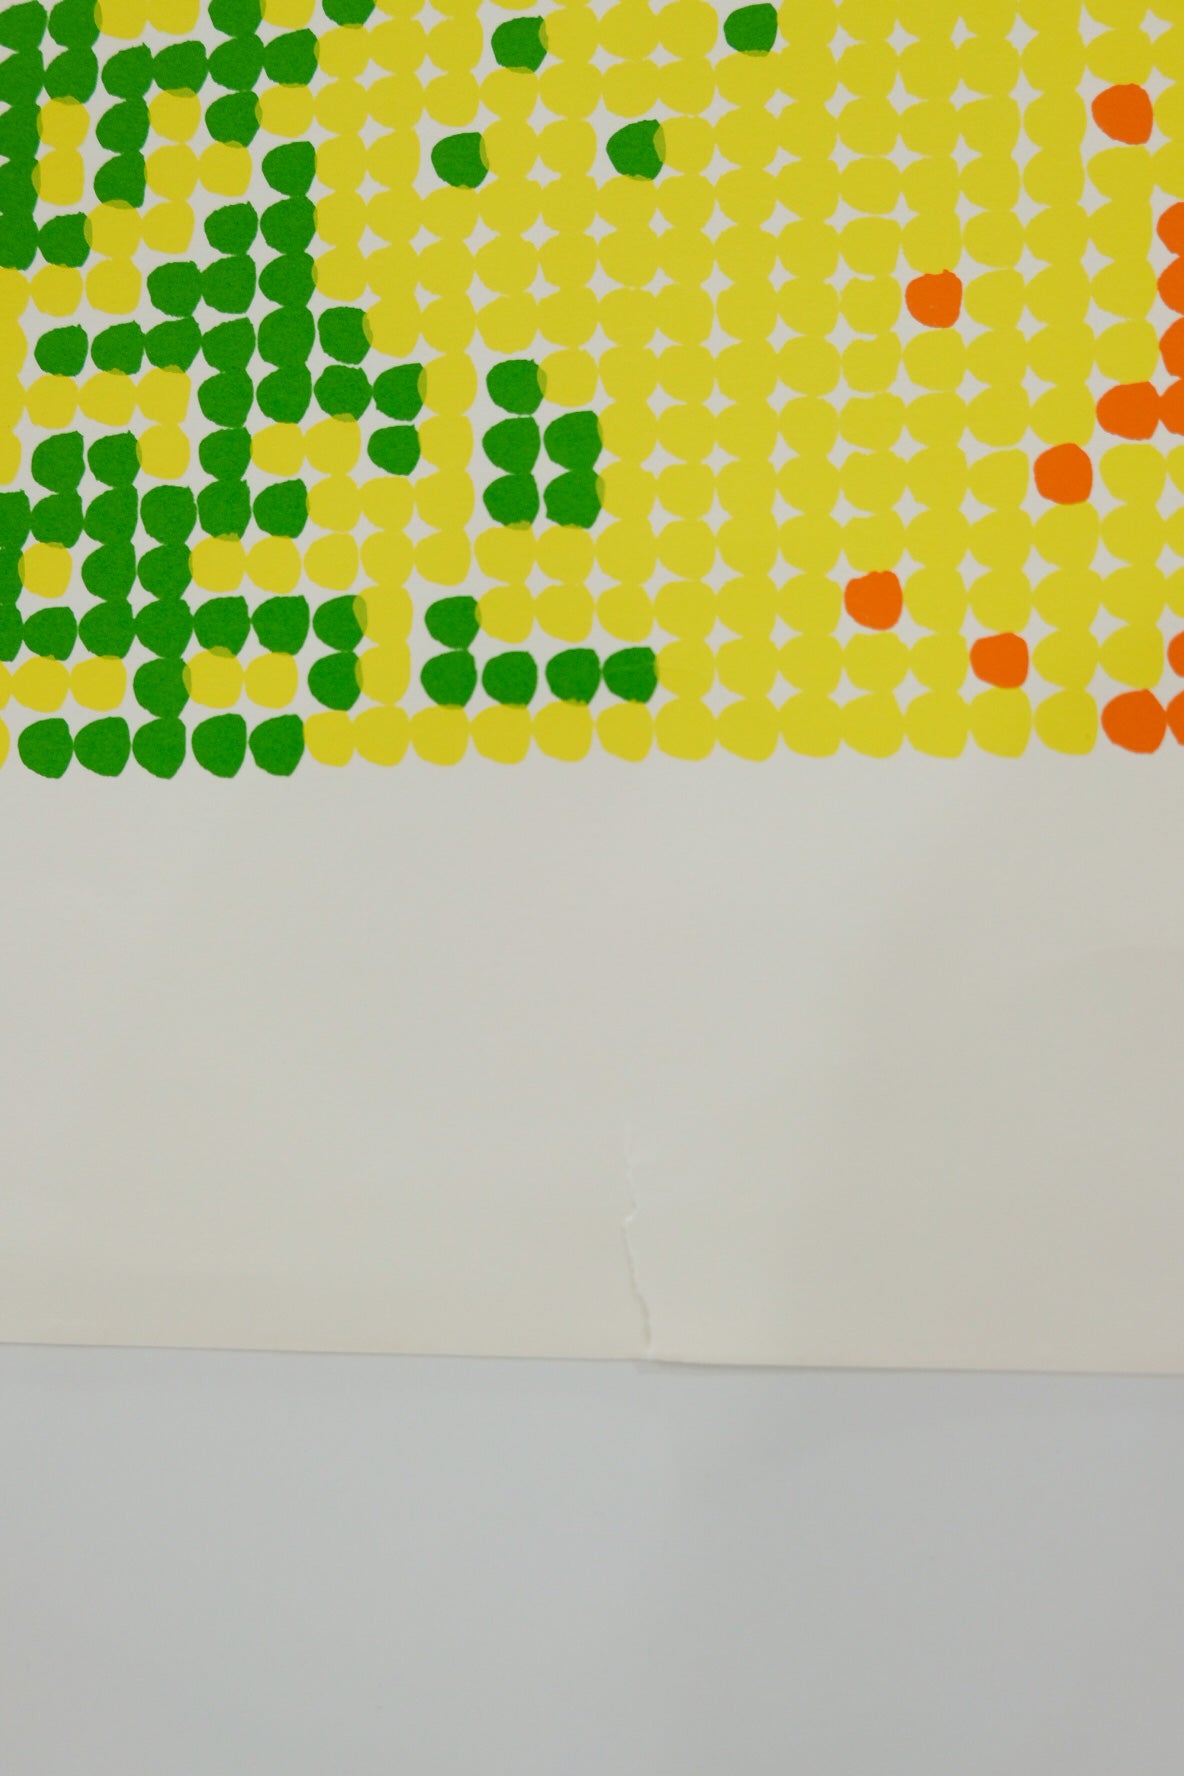 David Roth "Composition" Hand Signed Serigraph 1979